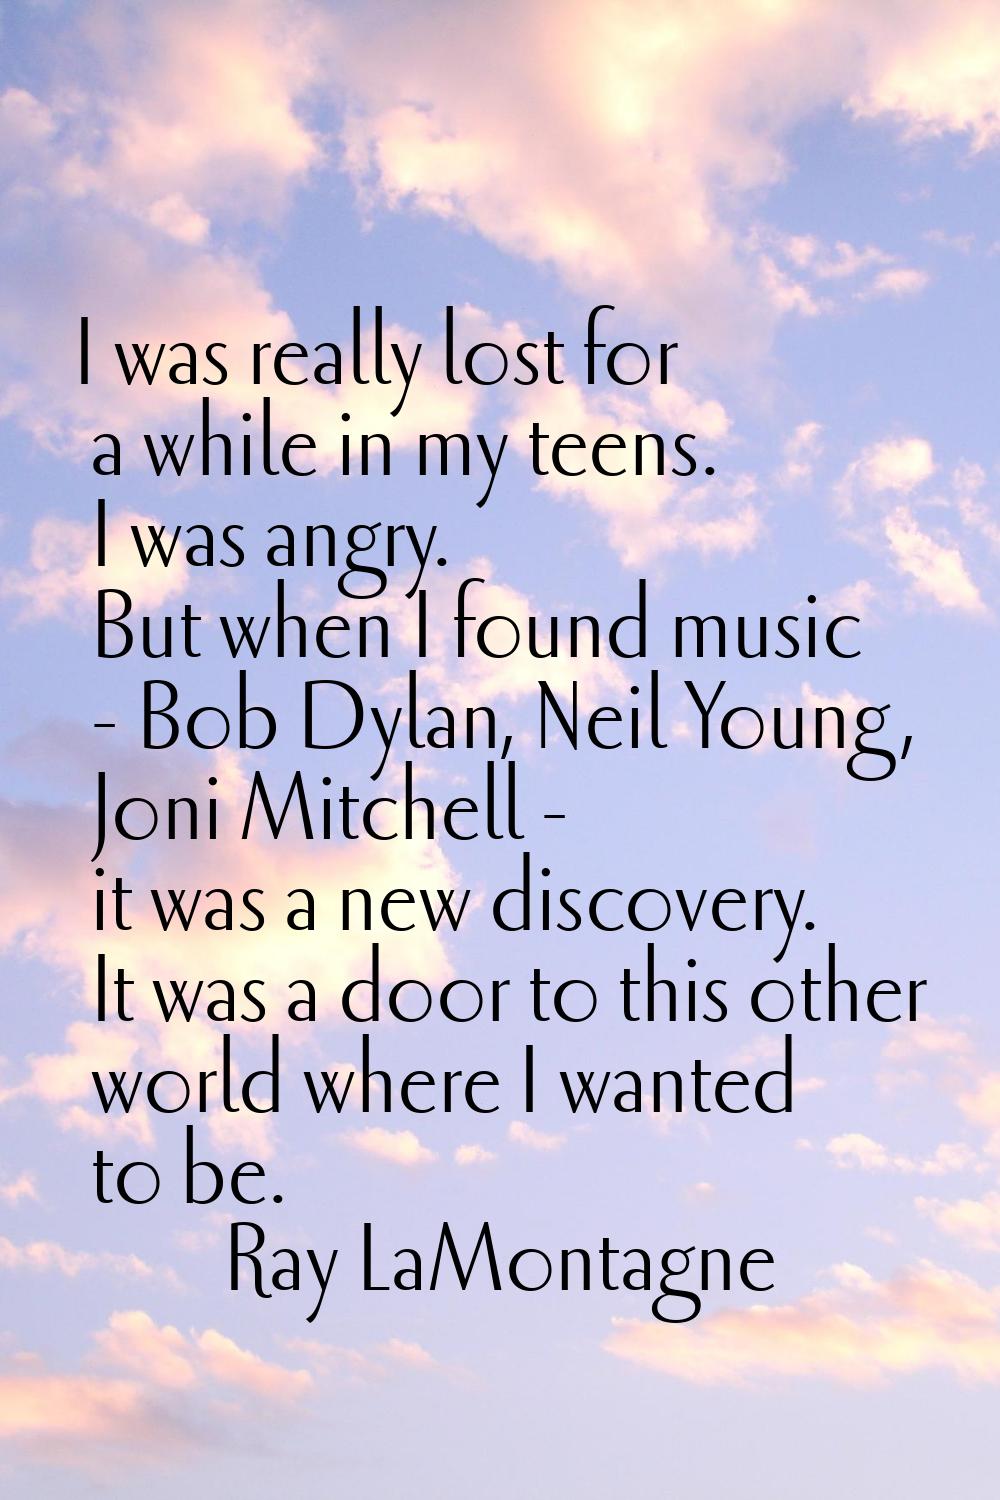 I was really lost for a while in my teens. I was angry. But when I found music - Bob Dylan, Neil Yo